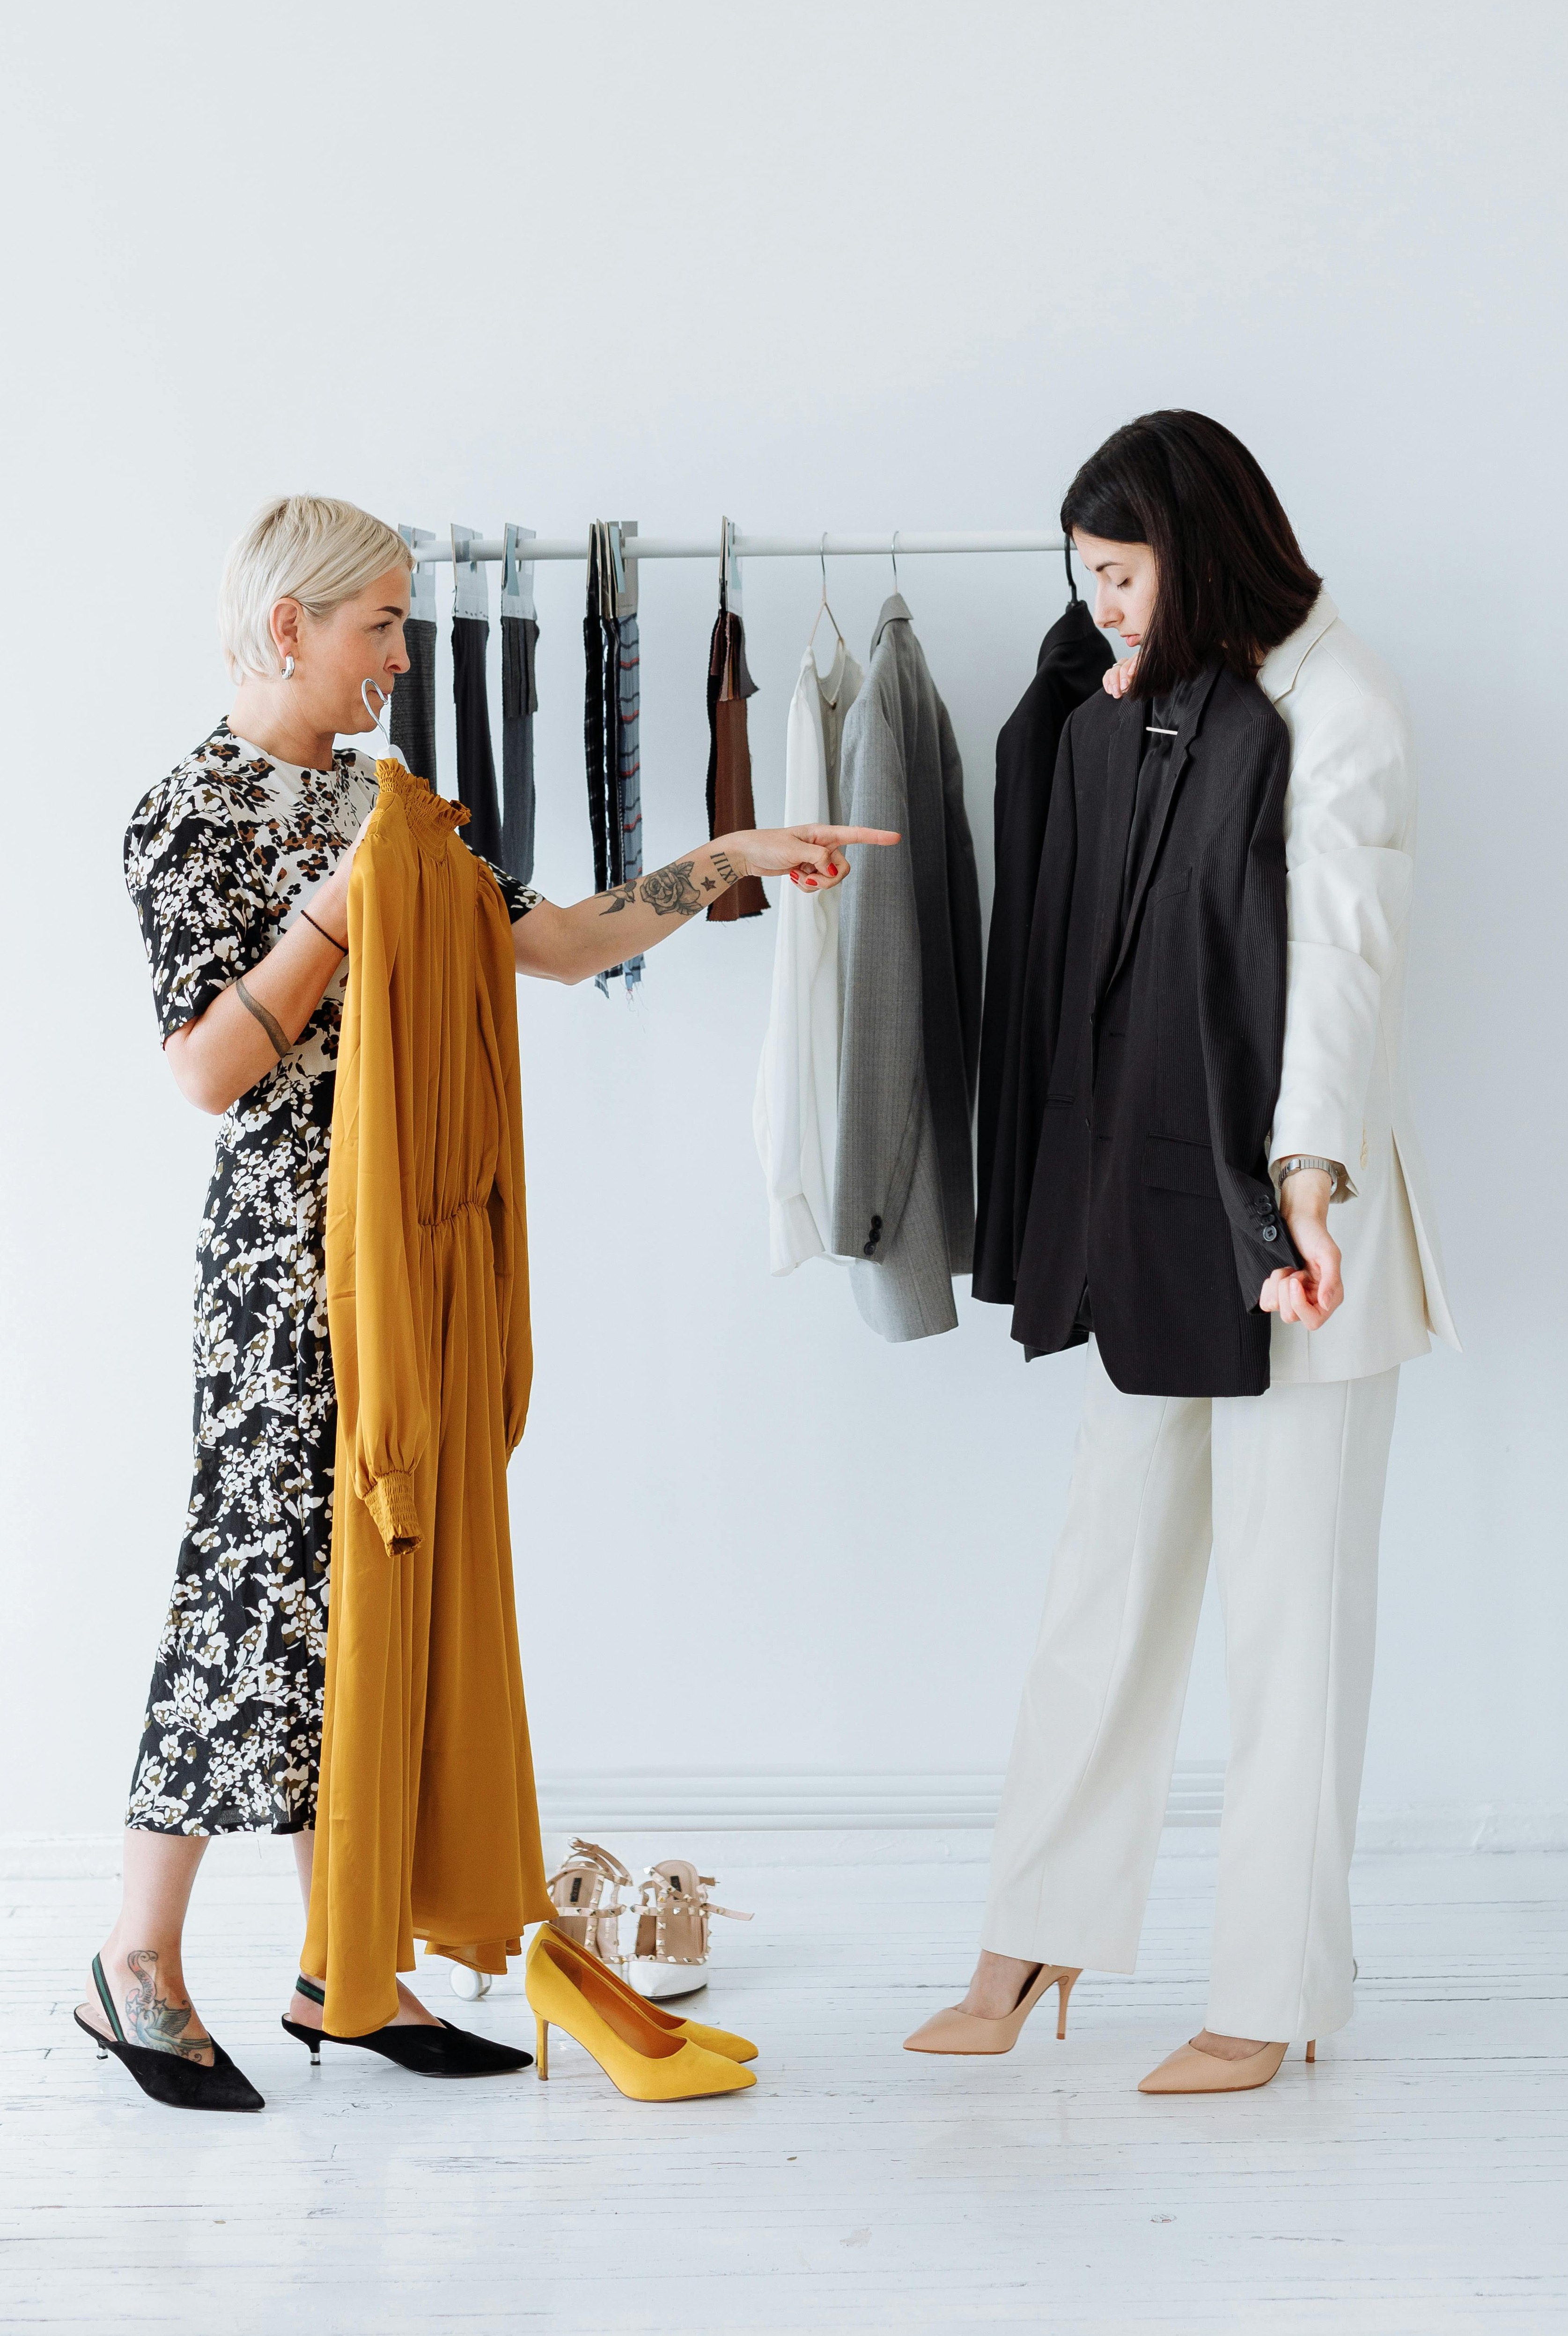 How to Become a Fashion Buyer (With Steps) in the UK - RETAILBOSS